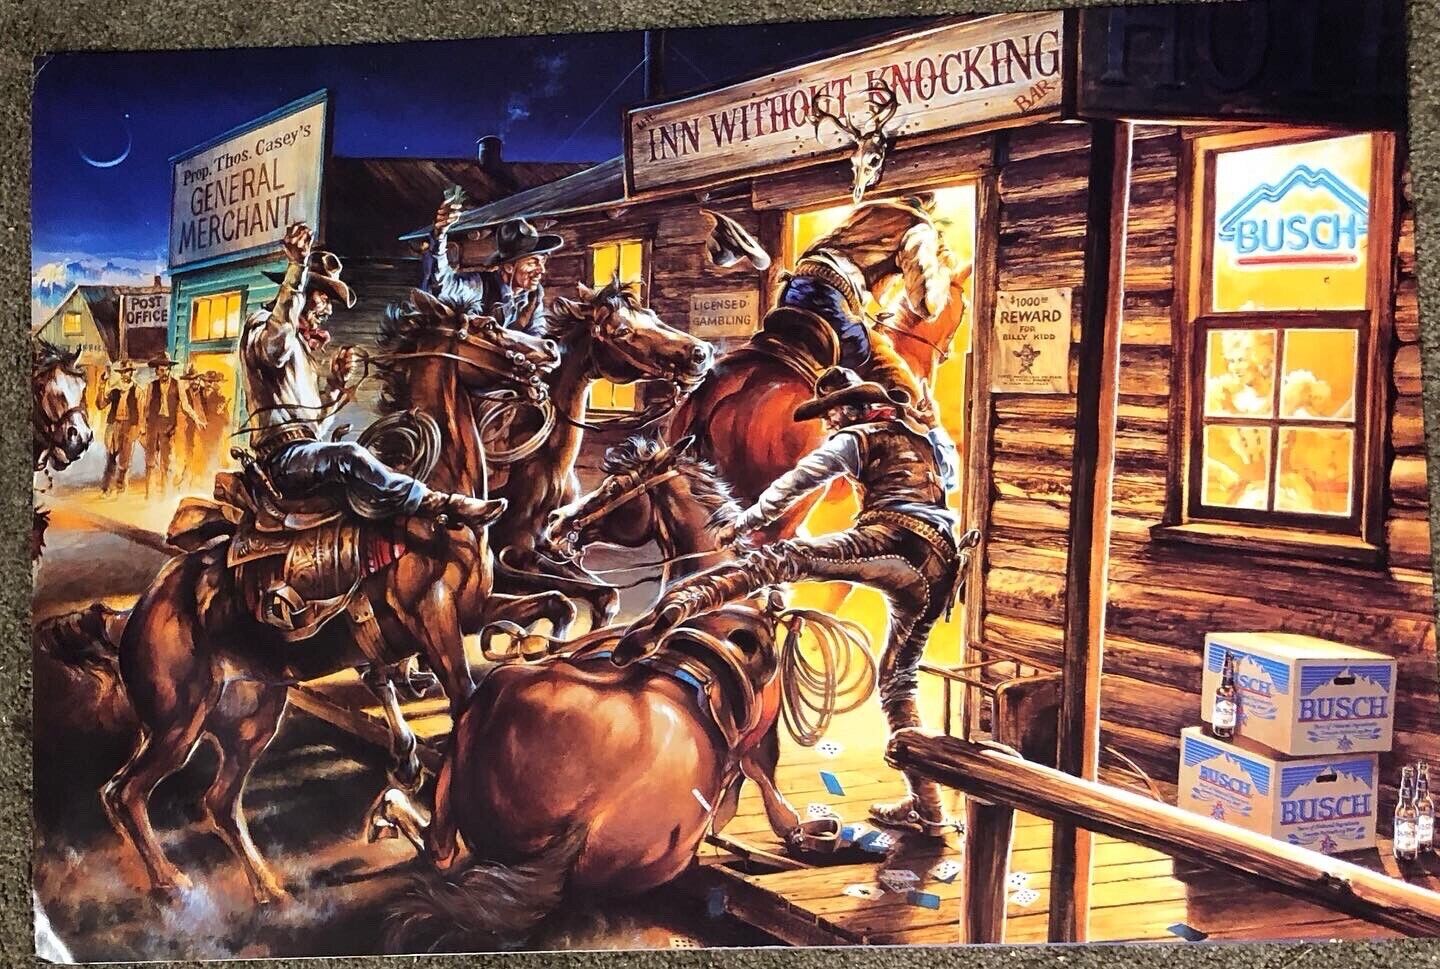 1980’s Busch “Inn Without Knocking” Promotional Poster 